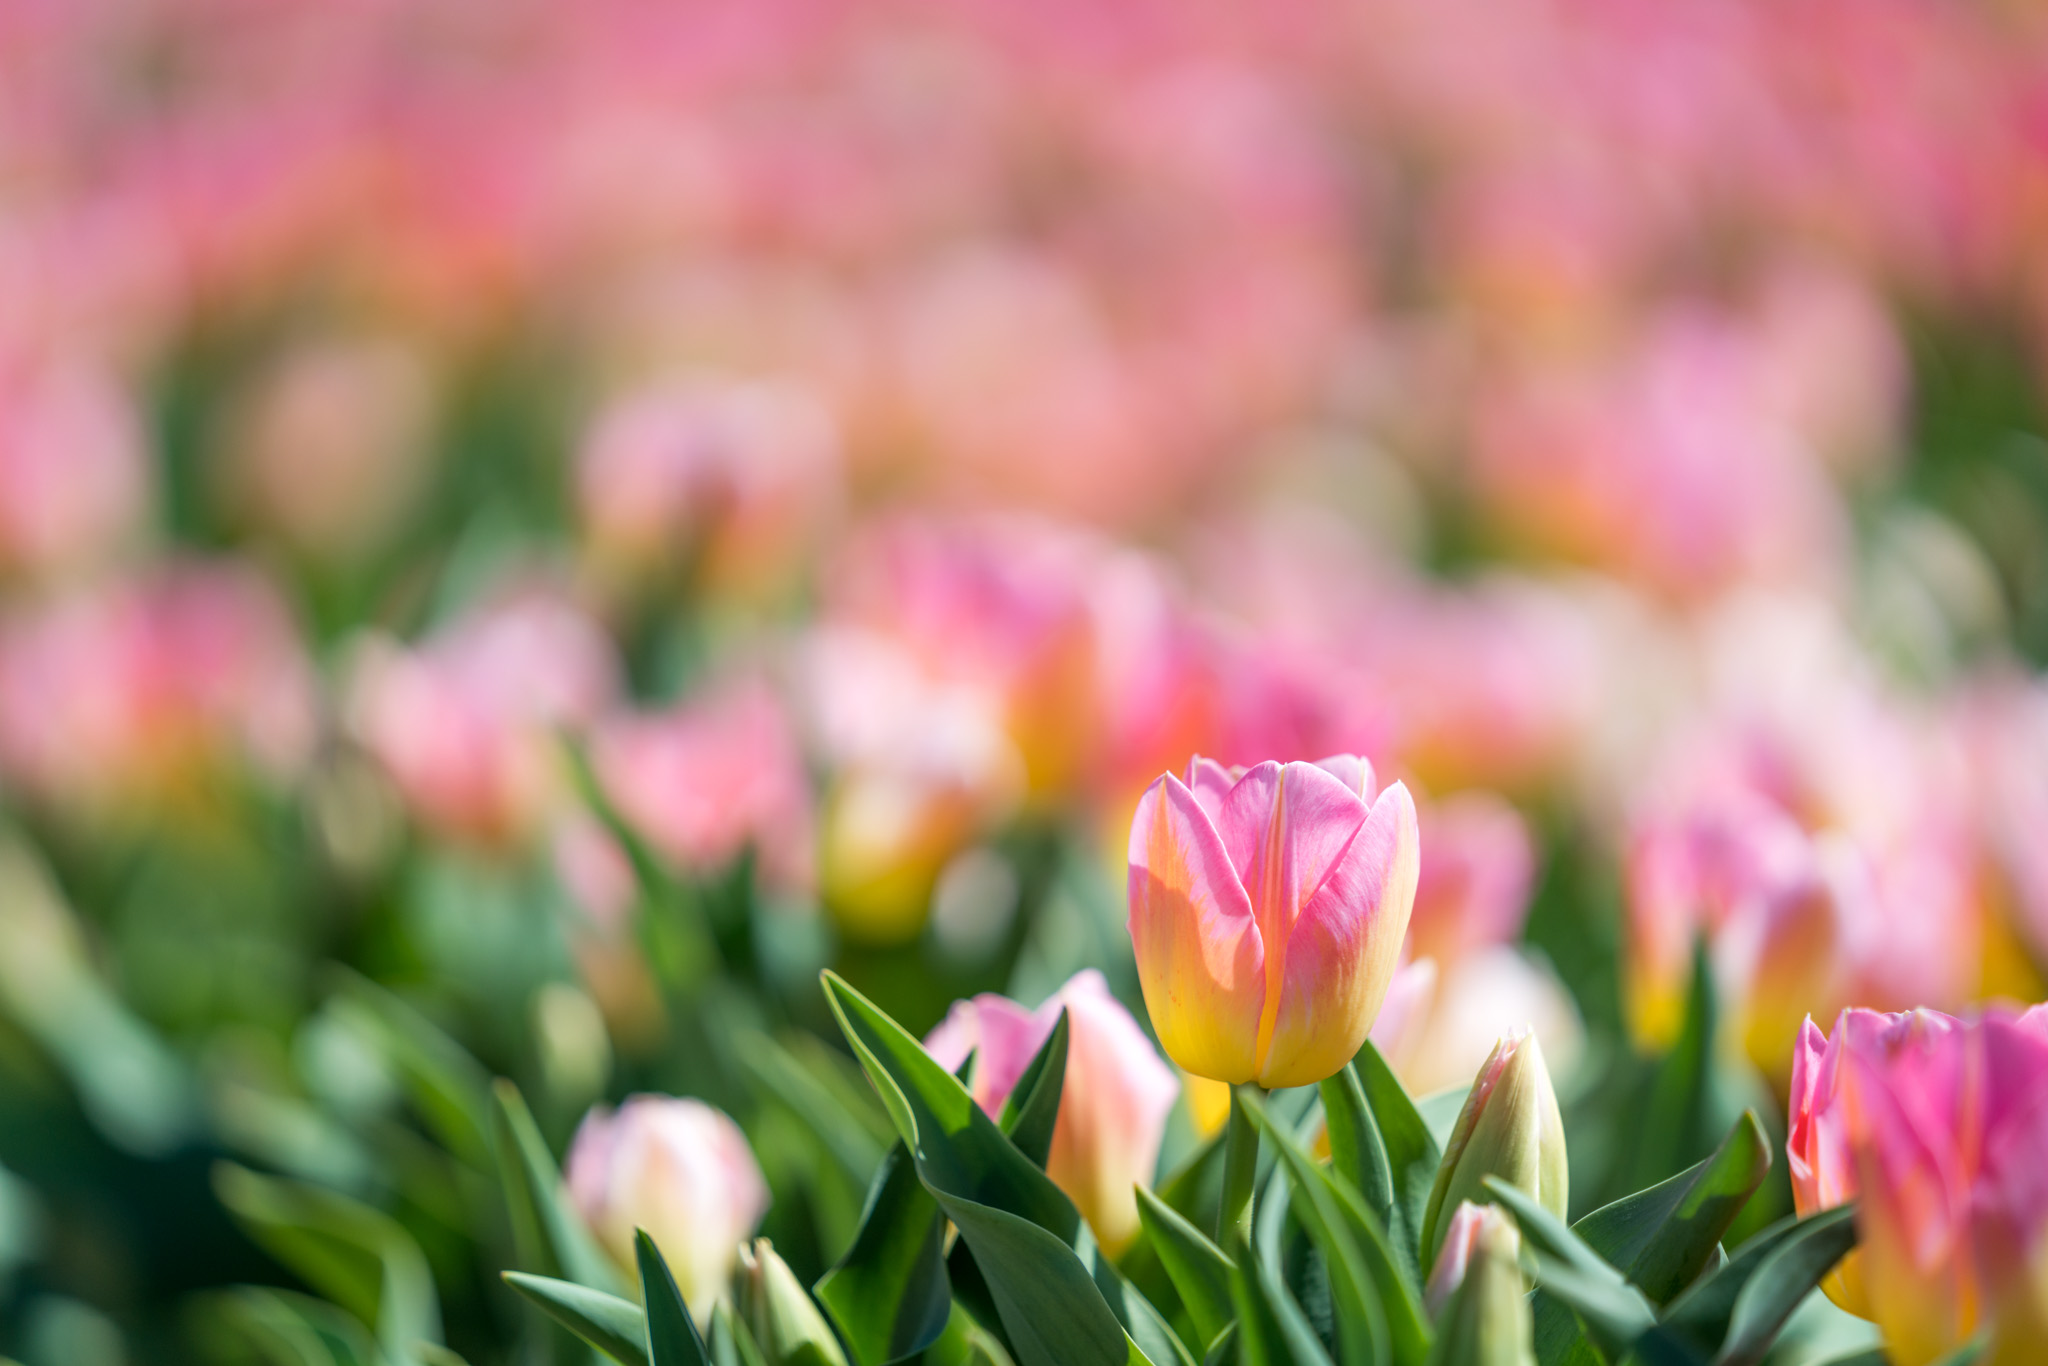 I went to an incredible Tulip field just north of Dallas, they were ...